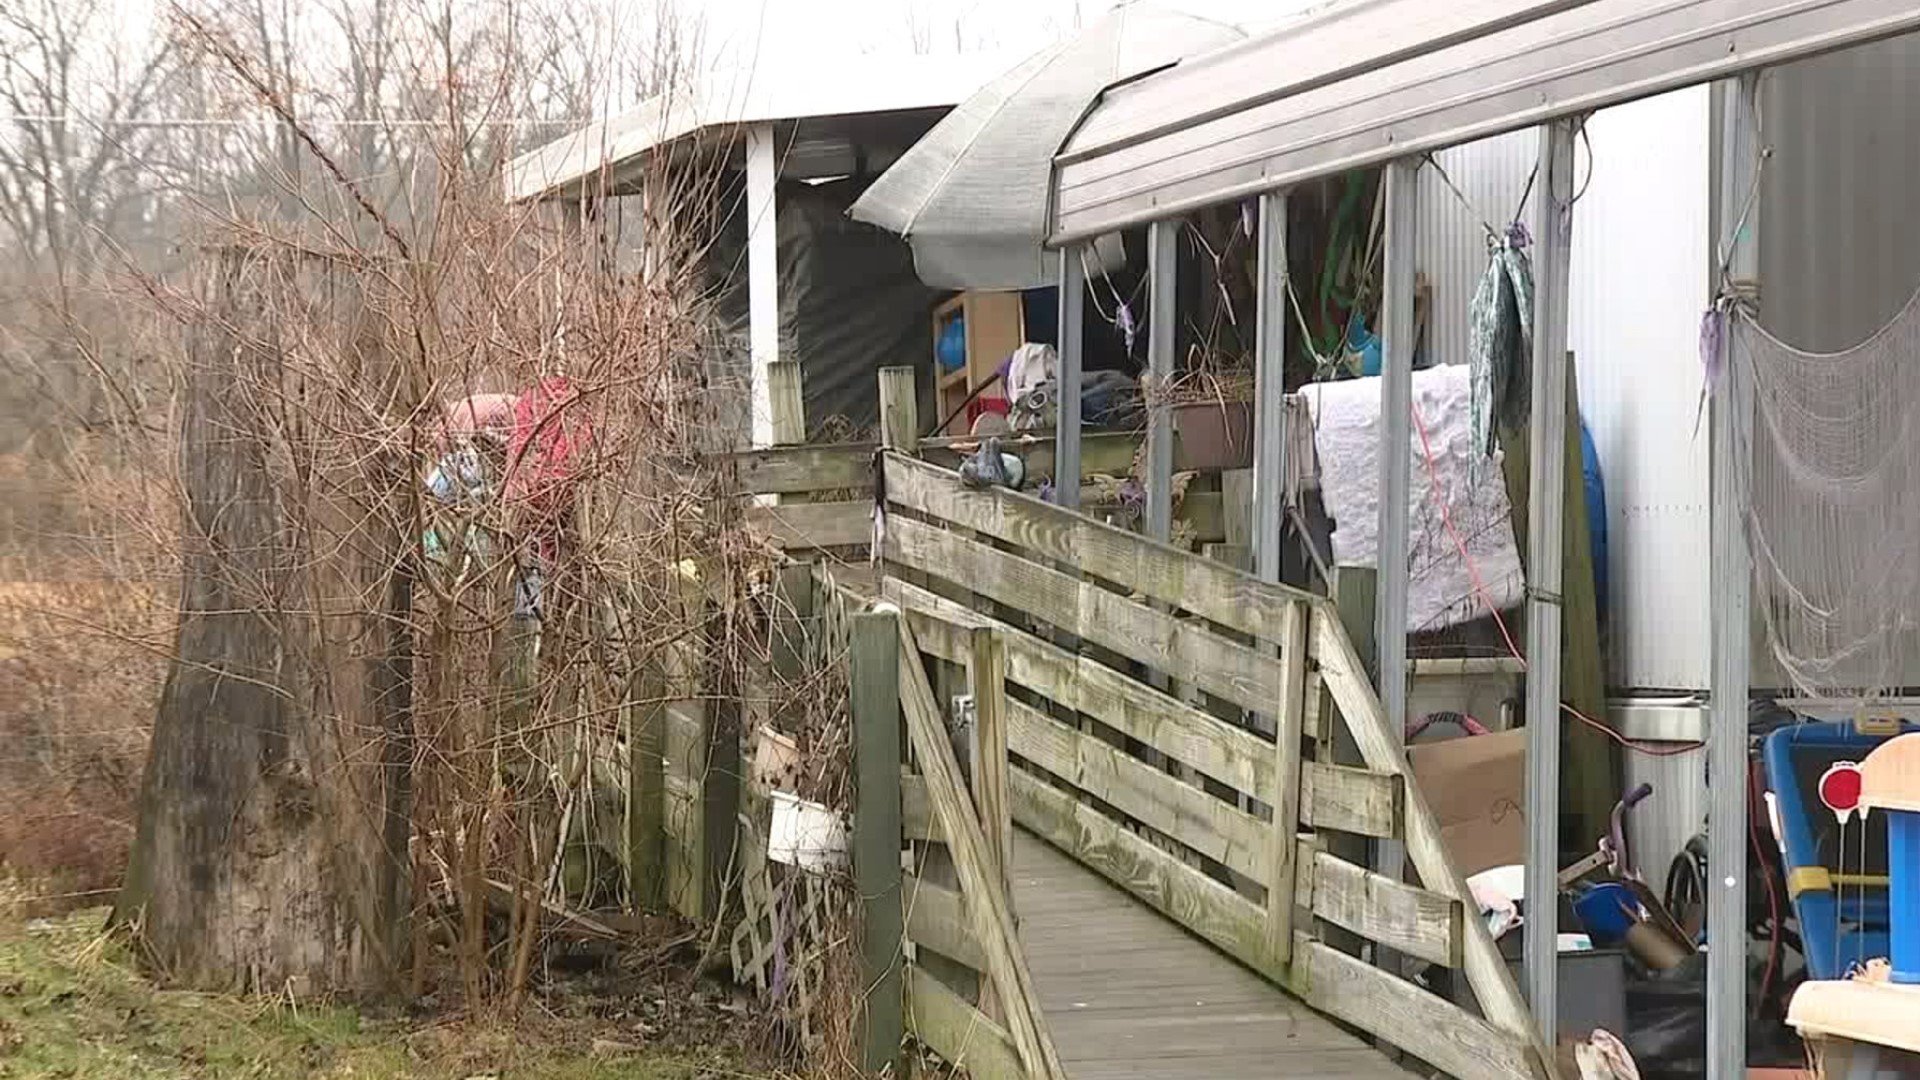 A mom is facing charges after troopers found her and her daughter living with trash piled up in their home.